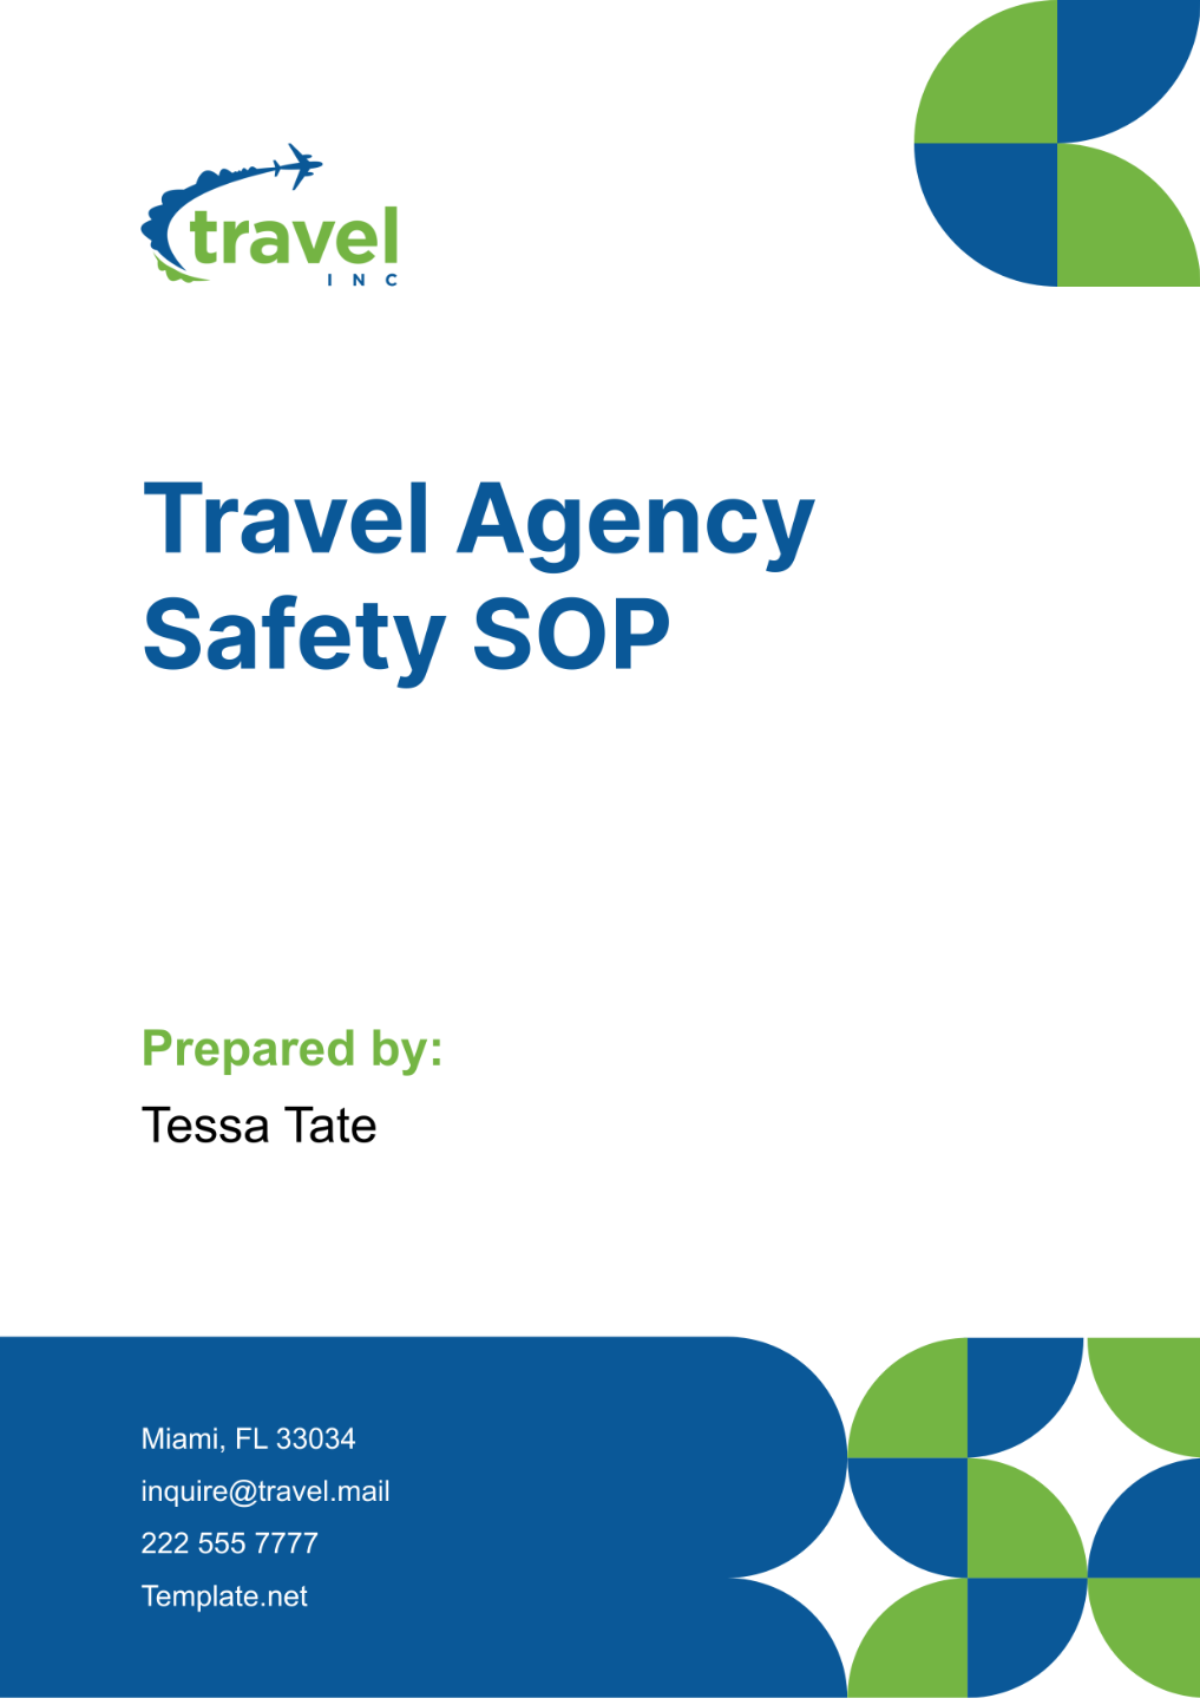 Travel Agency Safety SOP Template